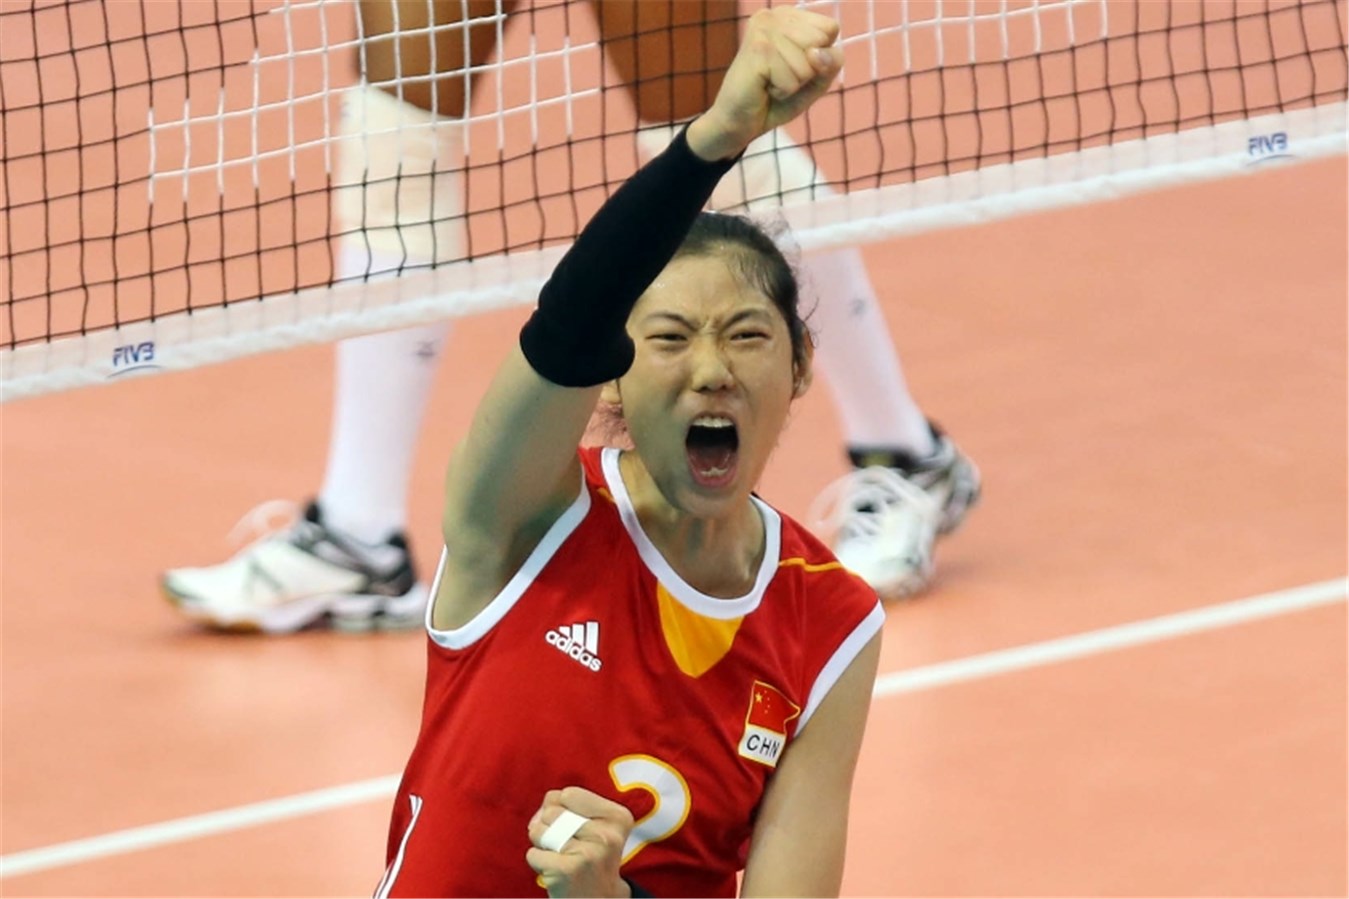 Chinese Volleyball Team Player - Zhu Ting